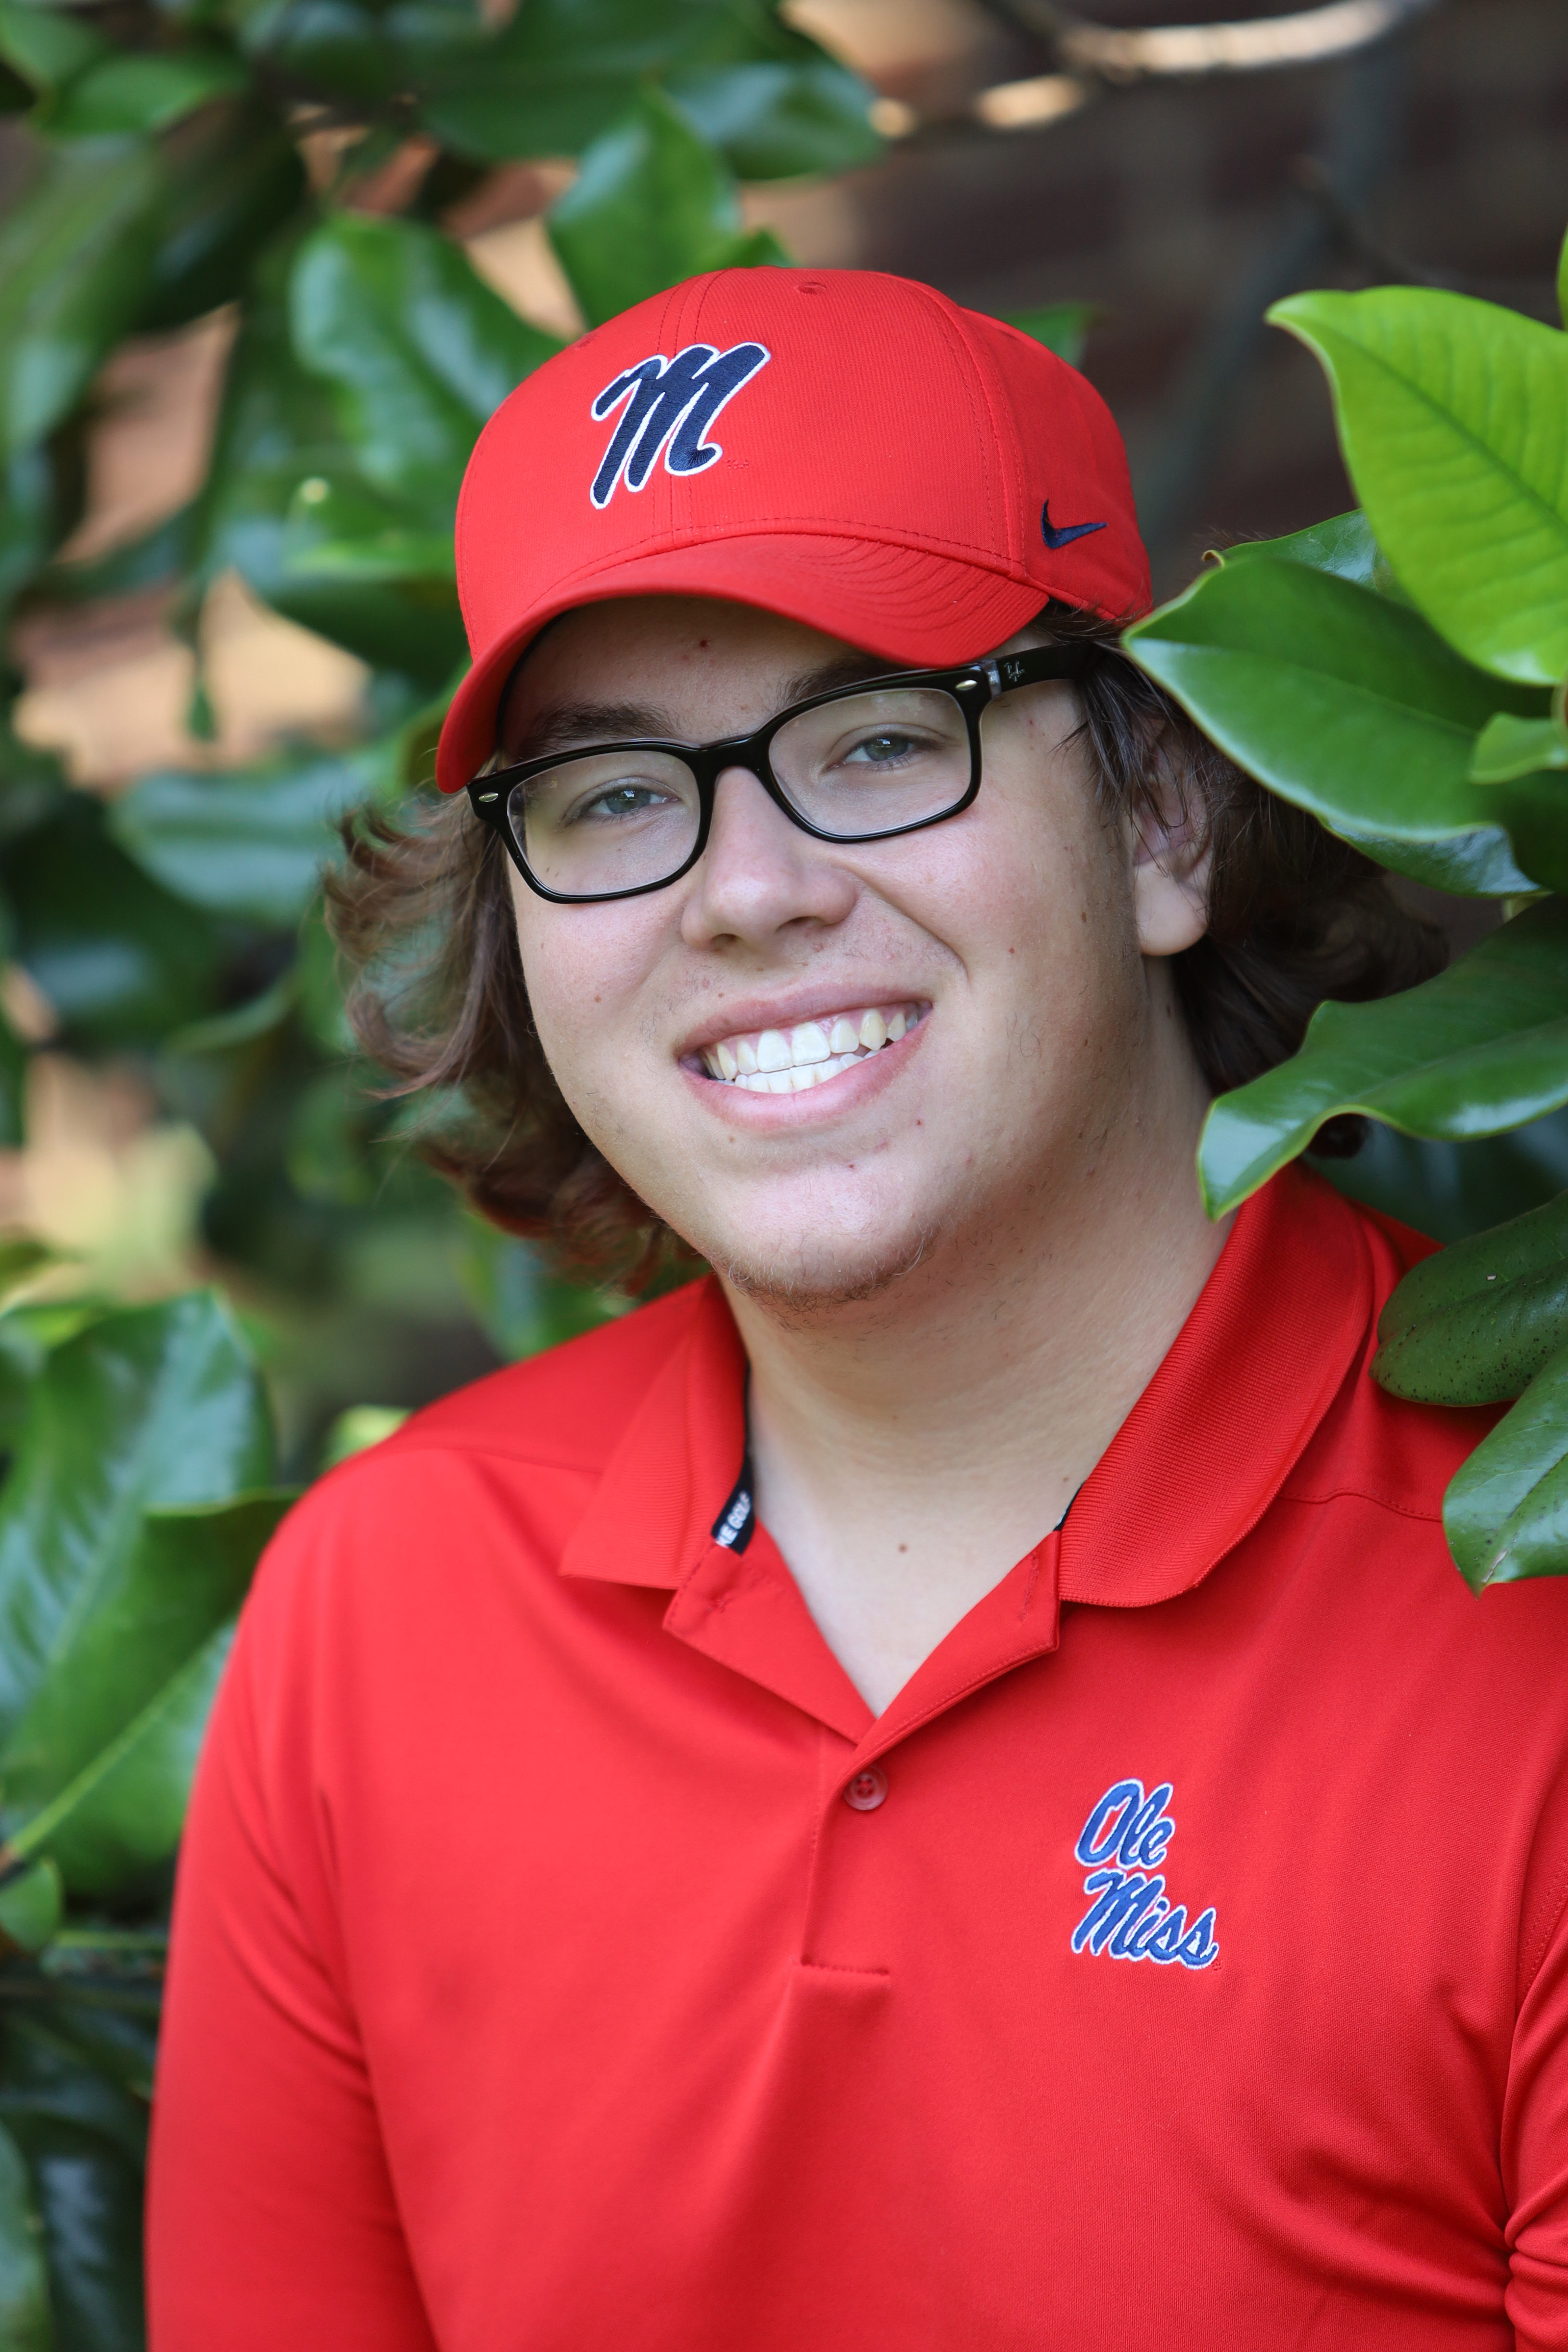 A young white man with glasses wearing red Ole Miss shirt and hat stands between Magnolia trees in bloom.